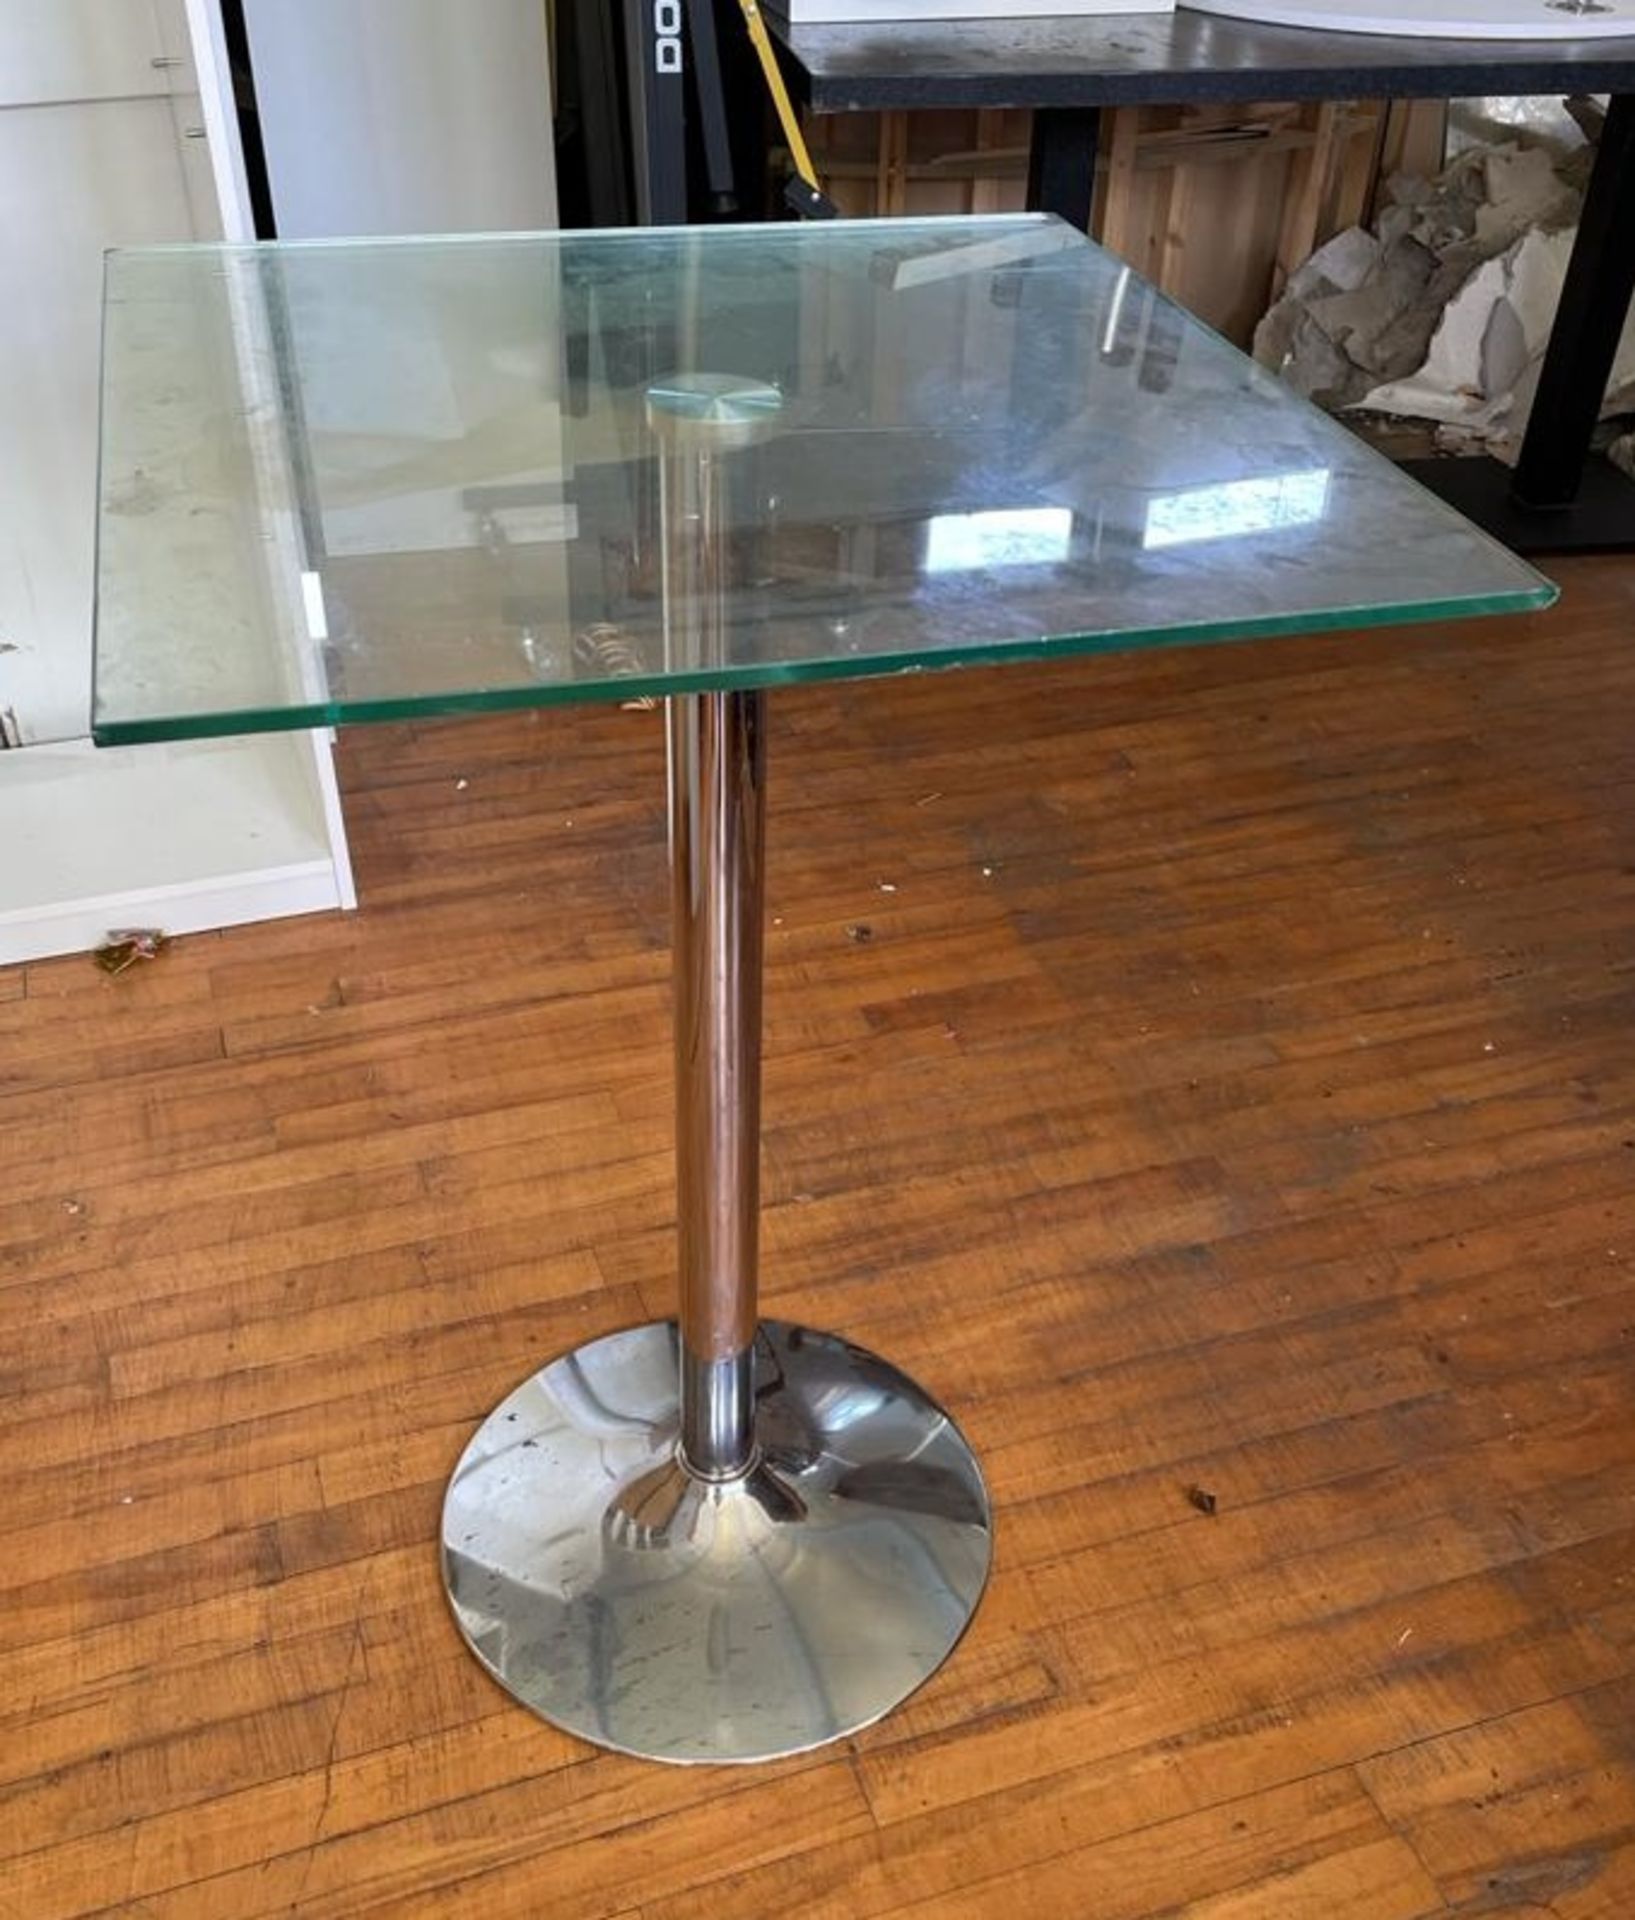 4 x Poseur Tables Features Chrome Bases and Glass Tops - CL667 - Location: Brighton, Sussex, - Image 2 of 2